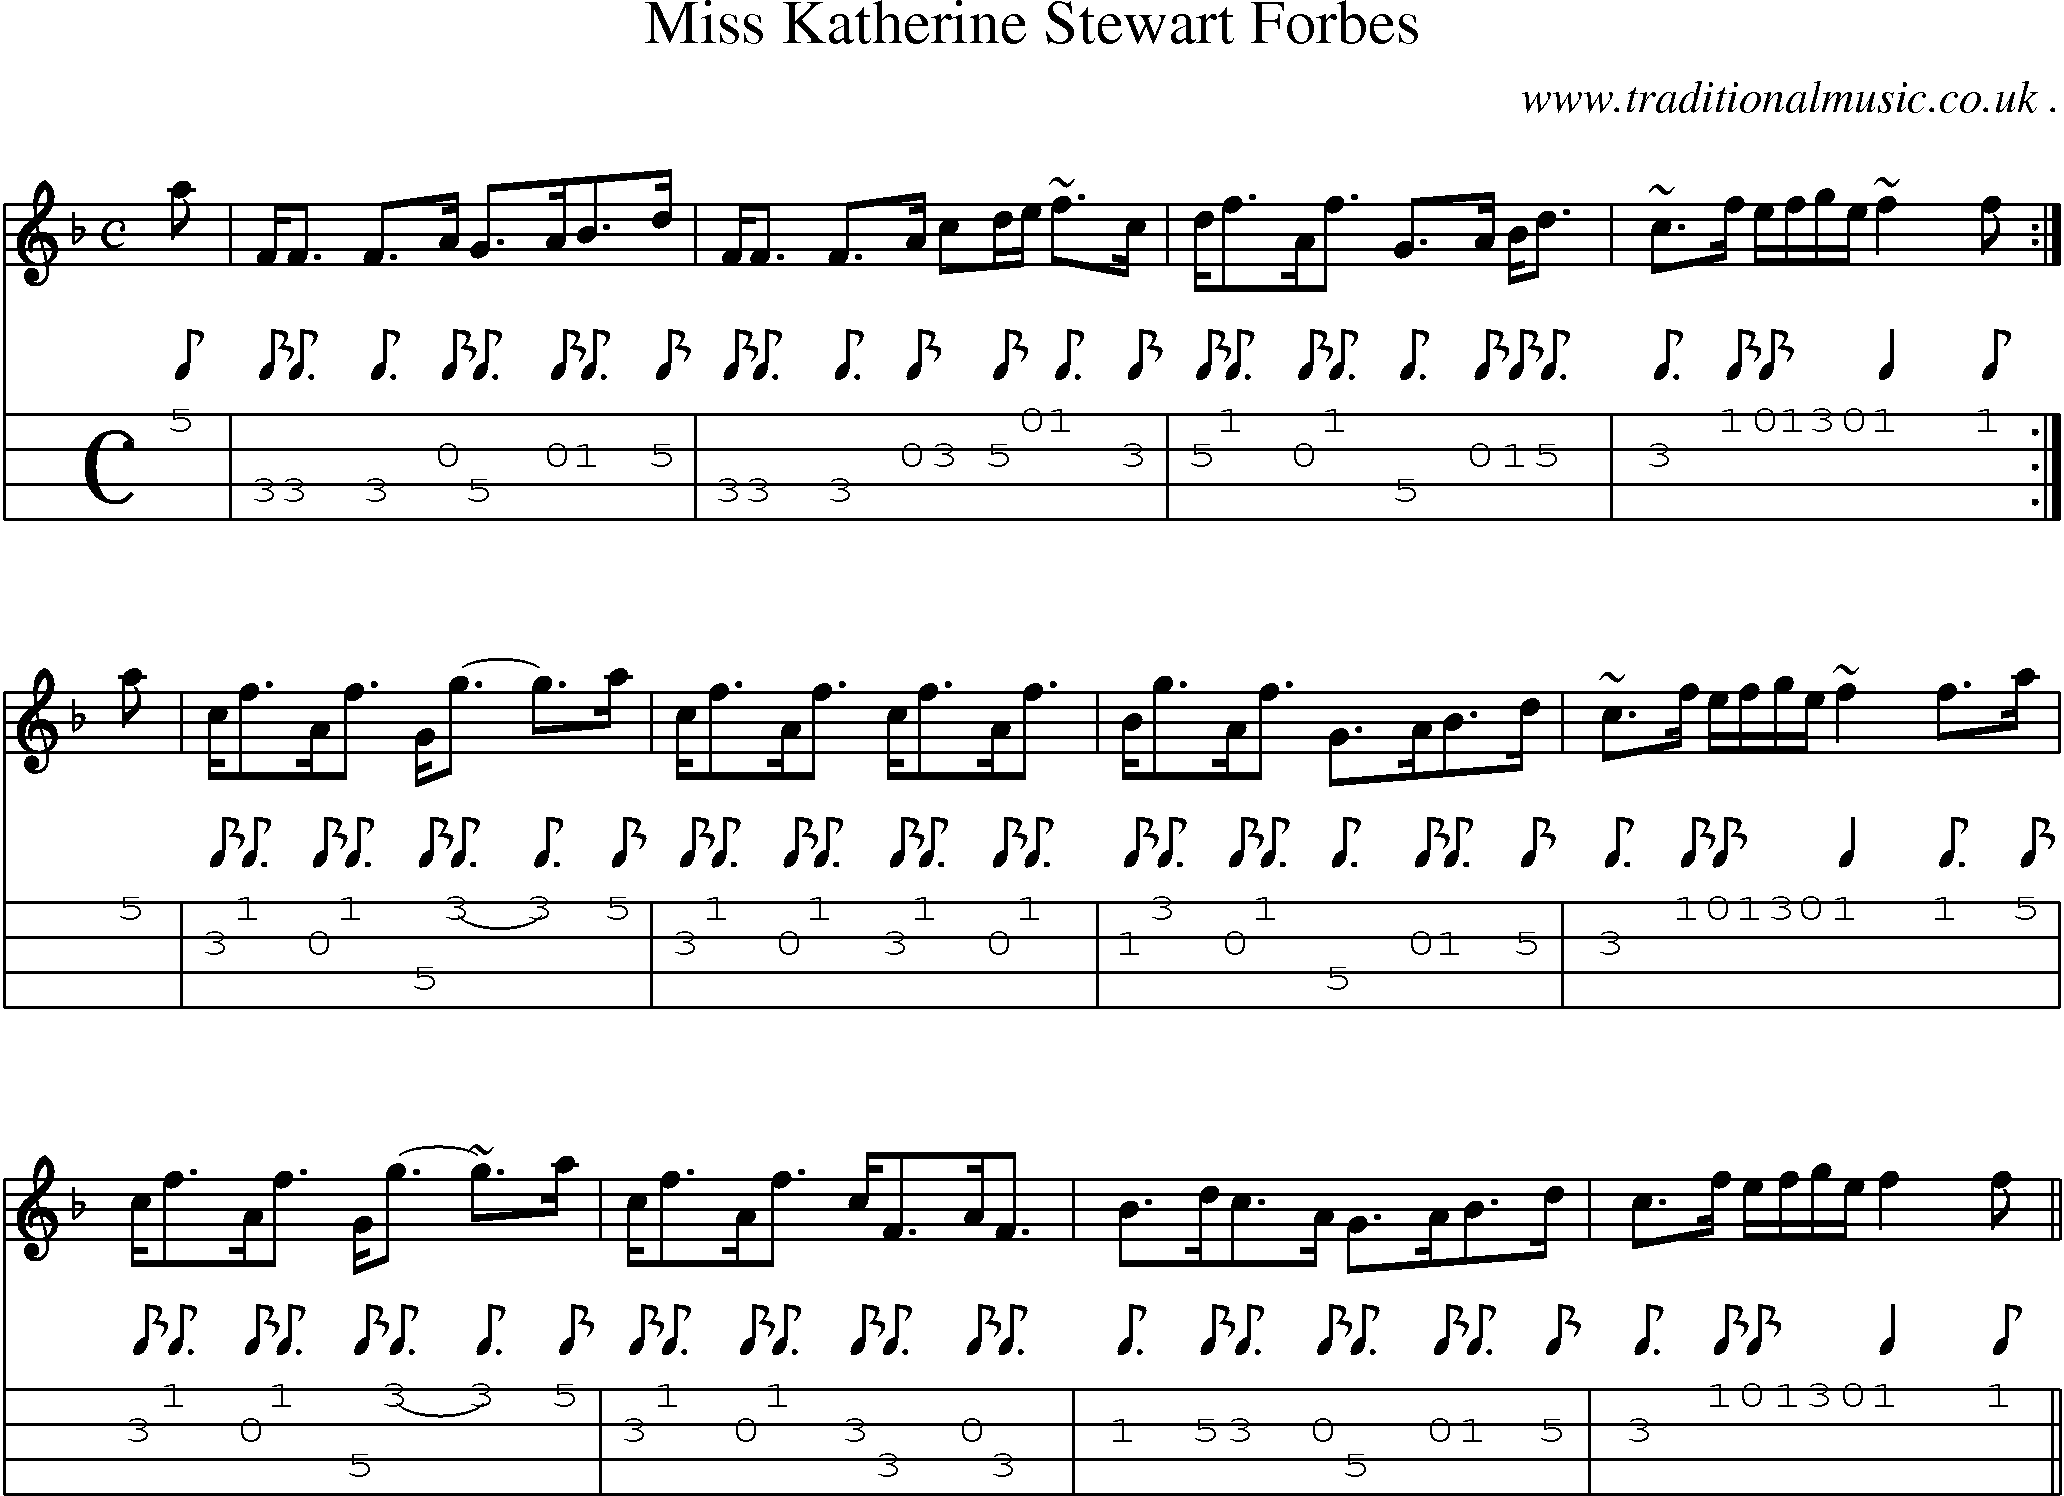 Sheet-music  score, Chords and Mandolin Tabs for Miss Katherine Stewart Forbes